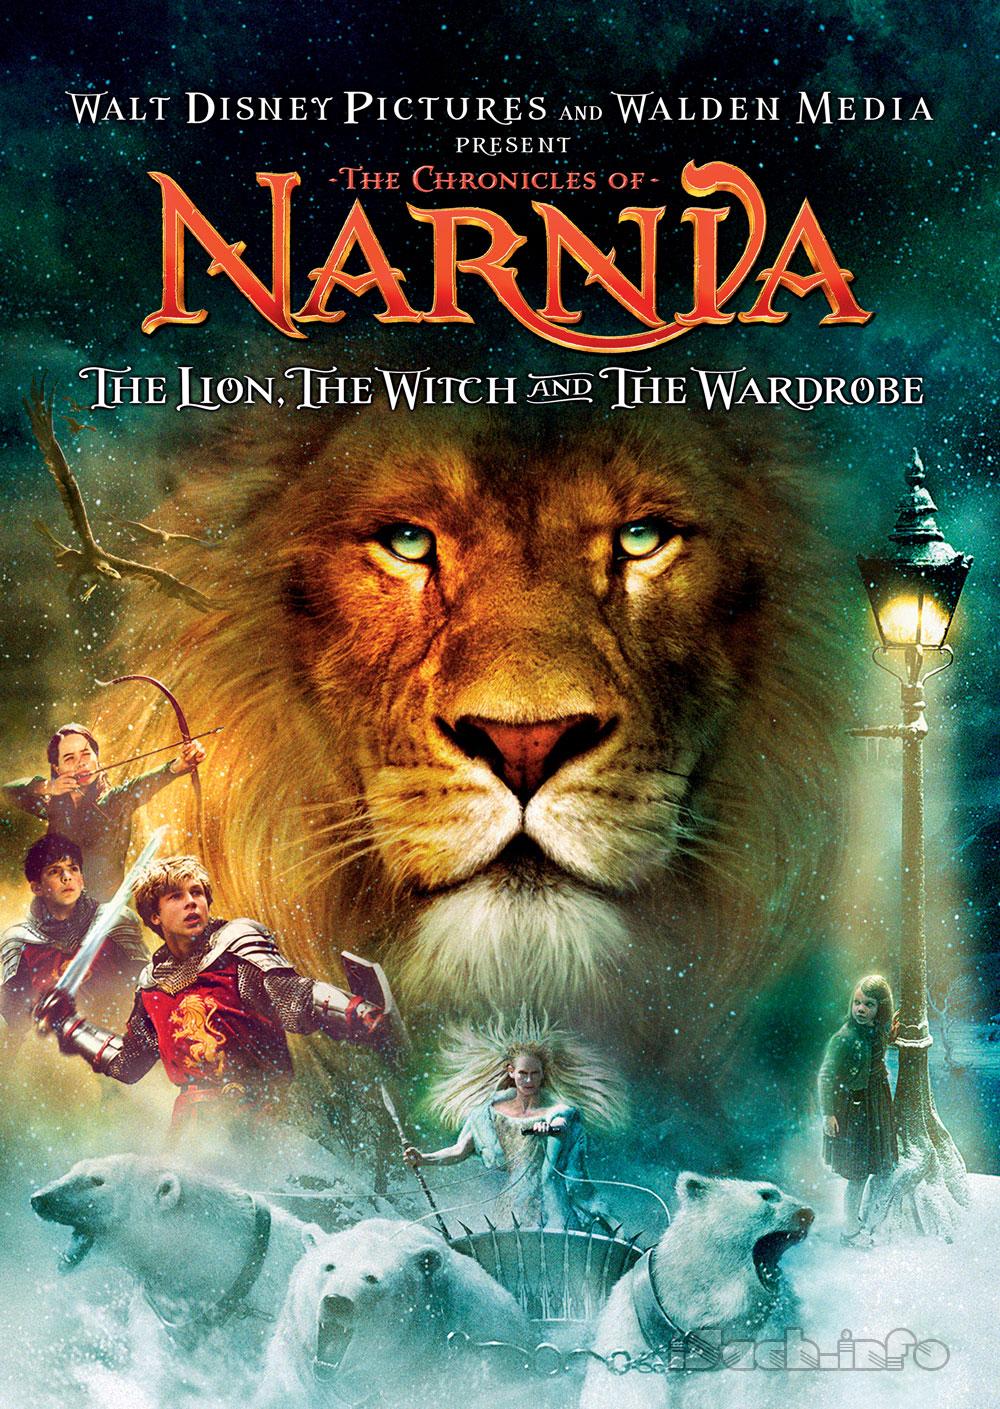 The Lion The Witch And The Warbrobe